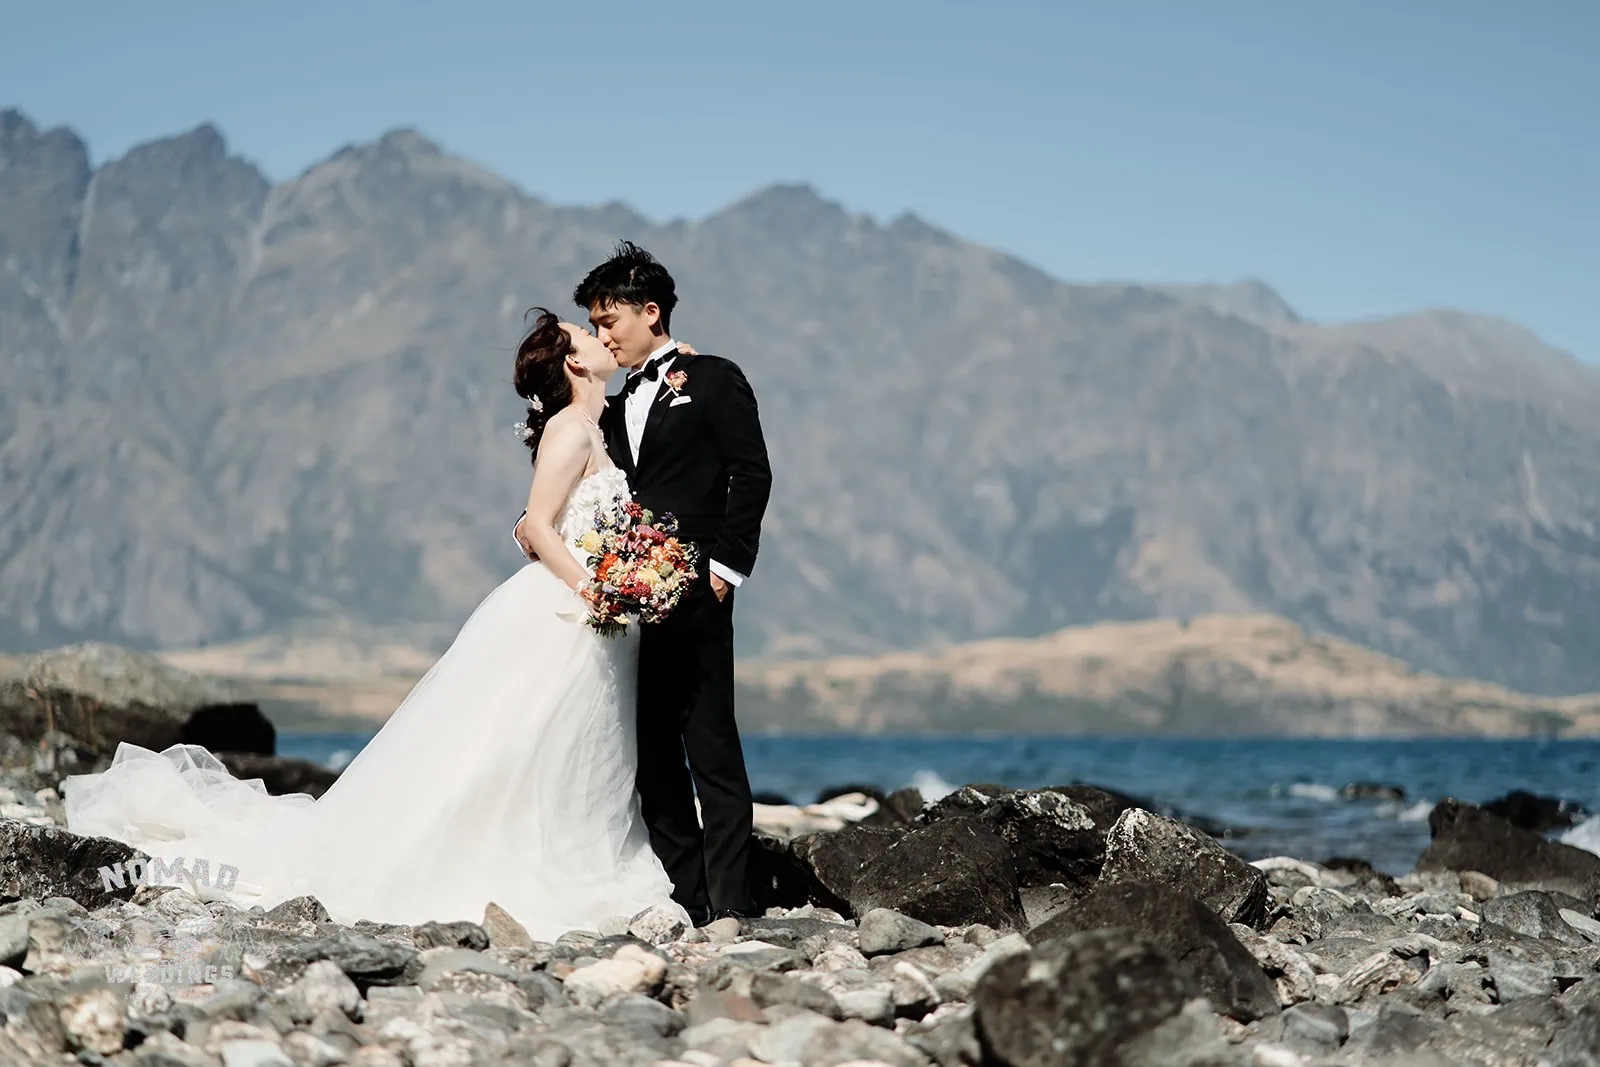 Queenstown New Zealand Elopement Wedding Photographer - A bride and groom standing on a rocky beach with mountains in the background - QUEENSTOWN SEASONS.